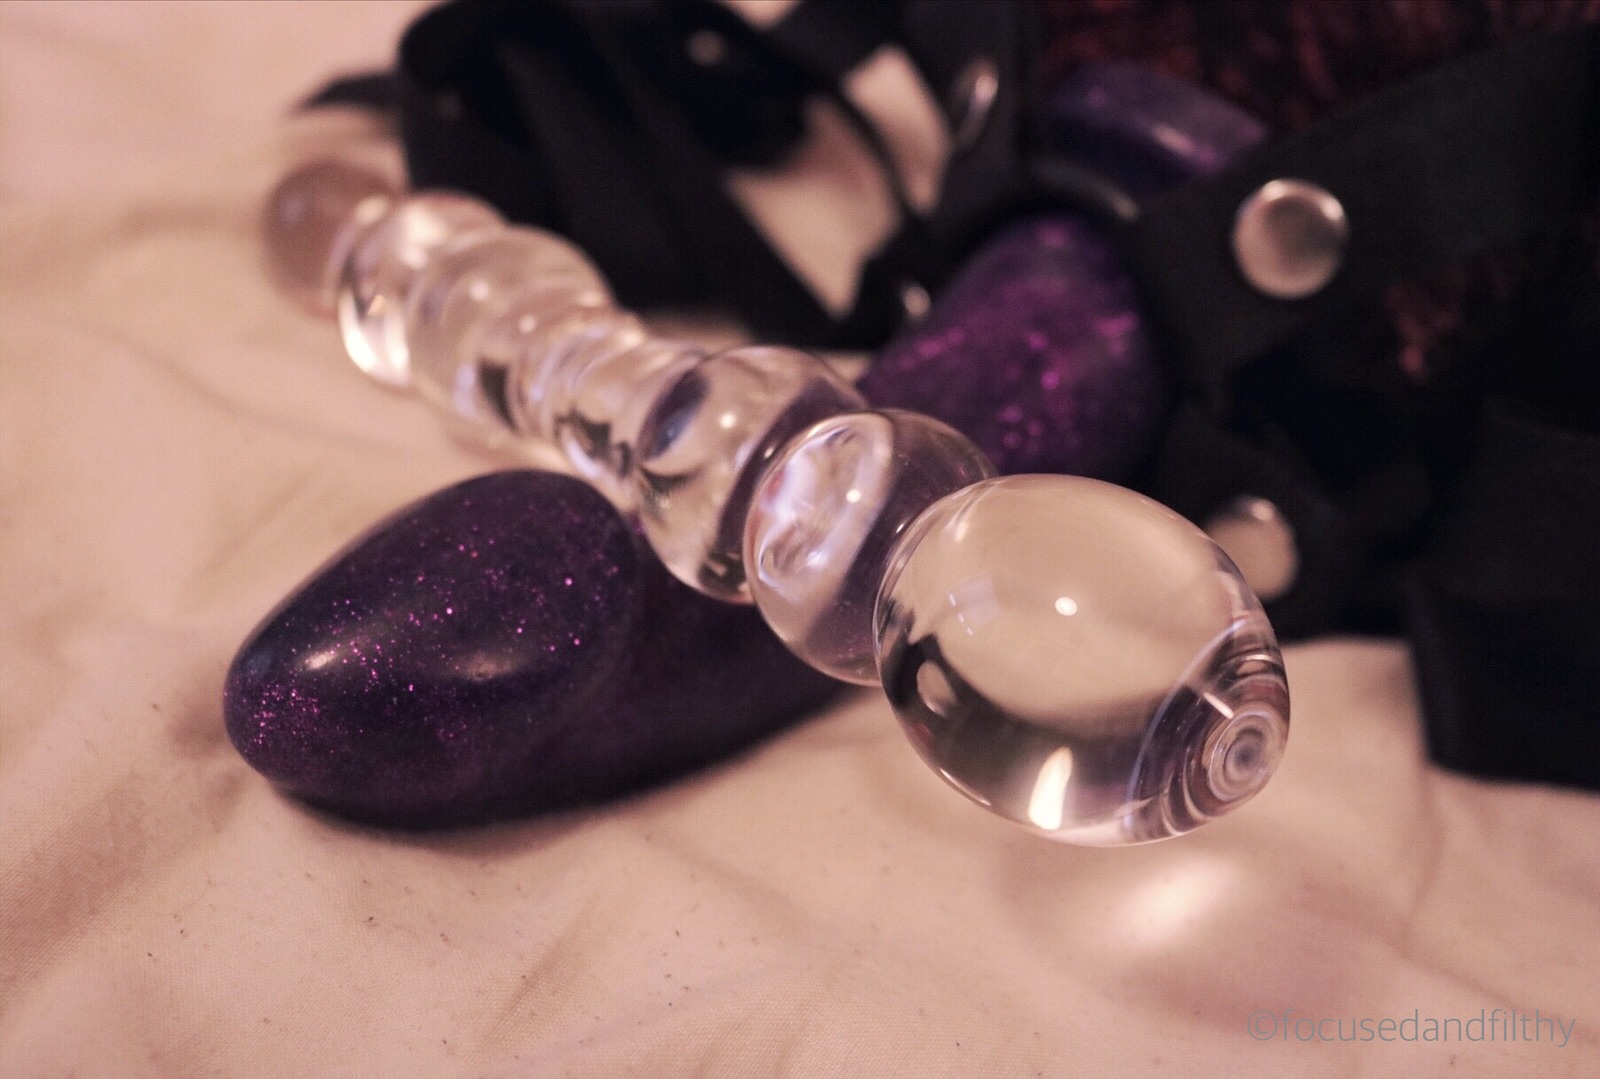 Close up colour photograph of a glass dildo laying across a purple sparkly silicone dildo in a strap-on laying on bedsheets 